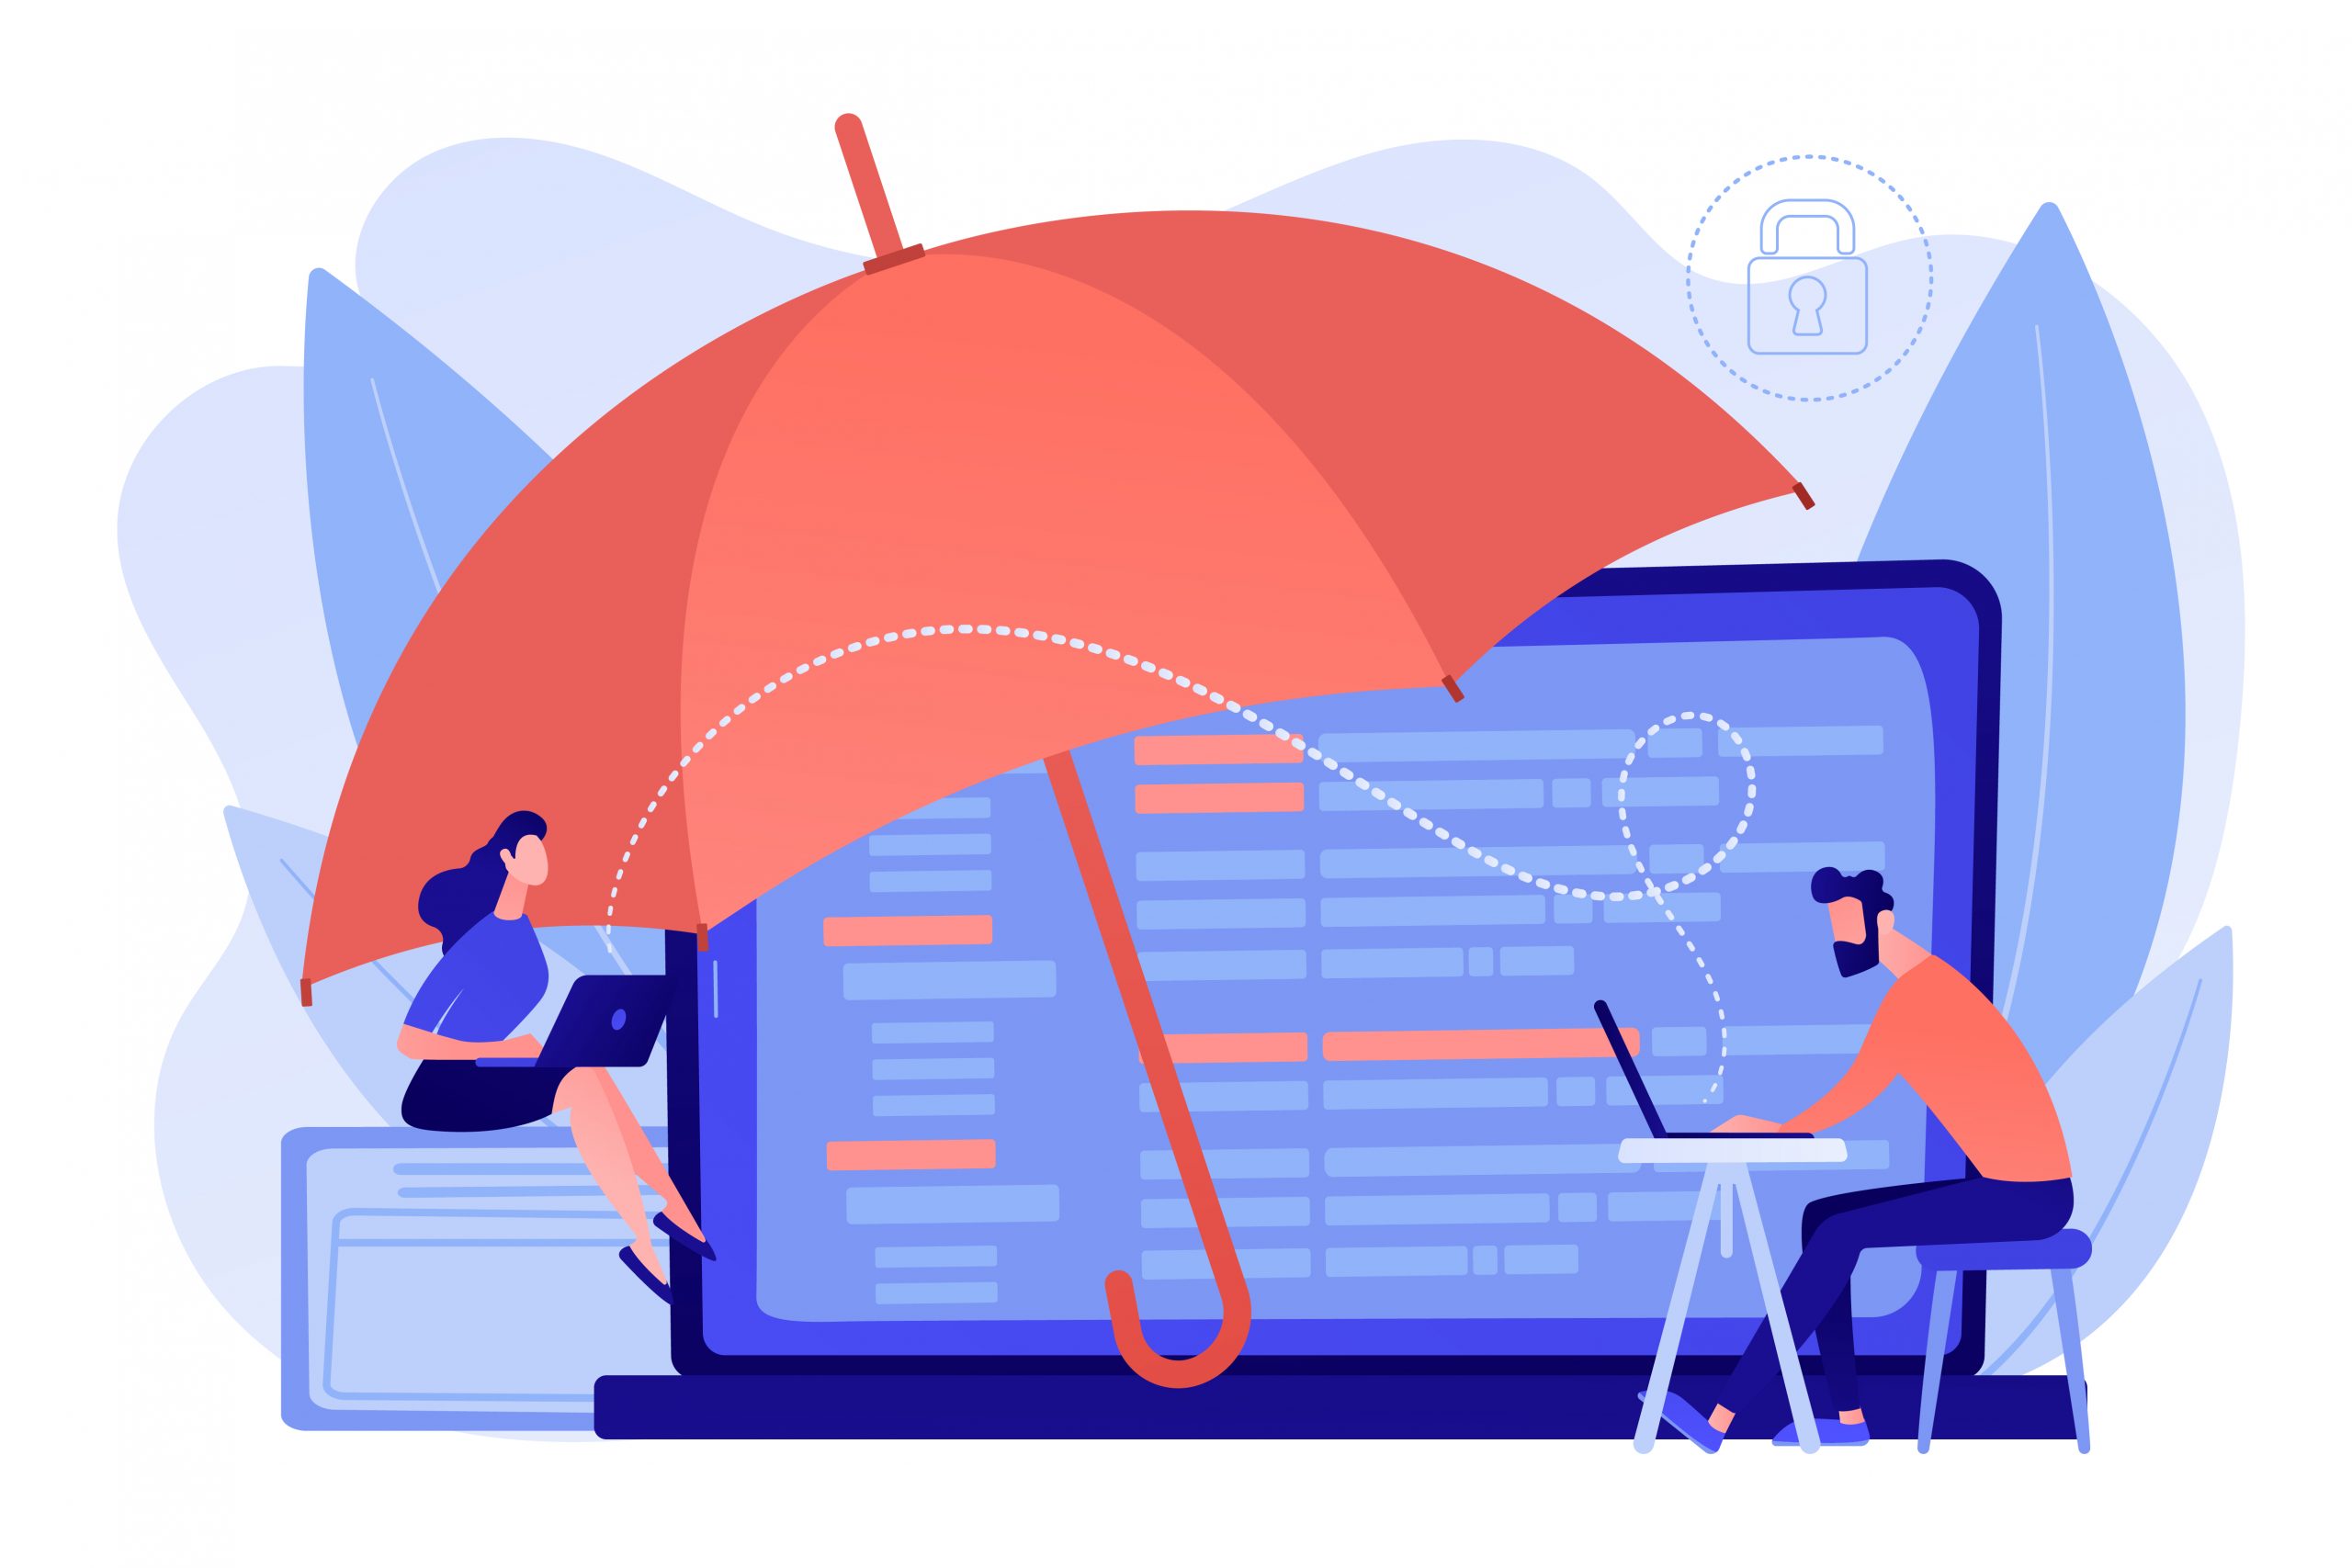 Business people work with laptops protected from internet-based risks. Cyber insurance, cyber-insurance market, cybercrime risk protection concept. Pinkish coral bluevector isolated illustration